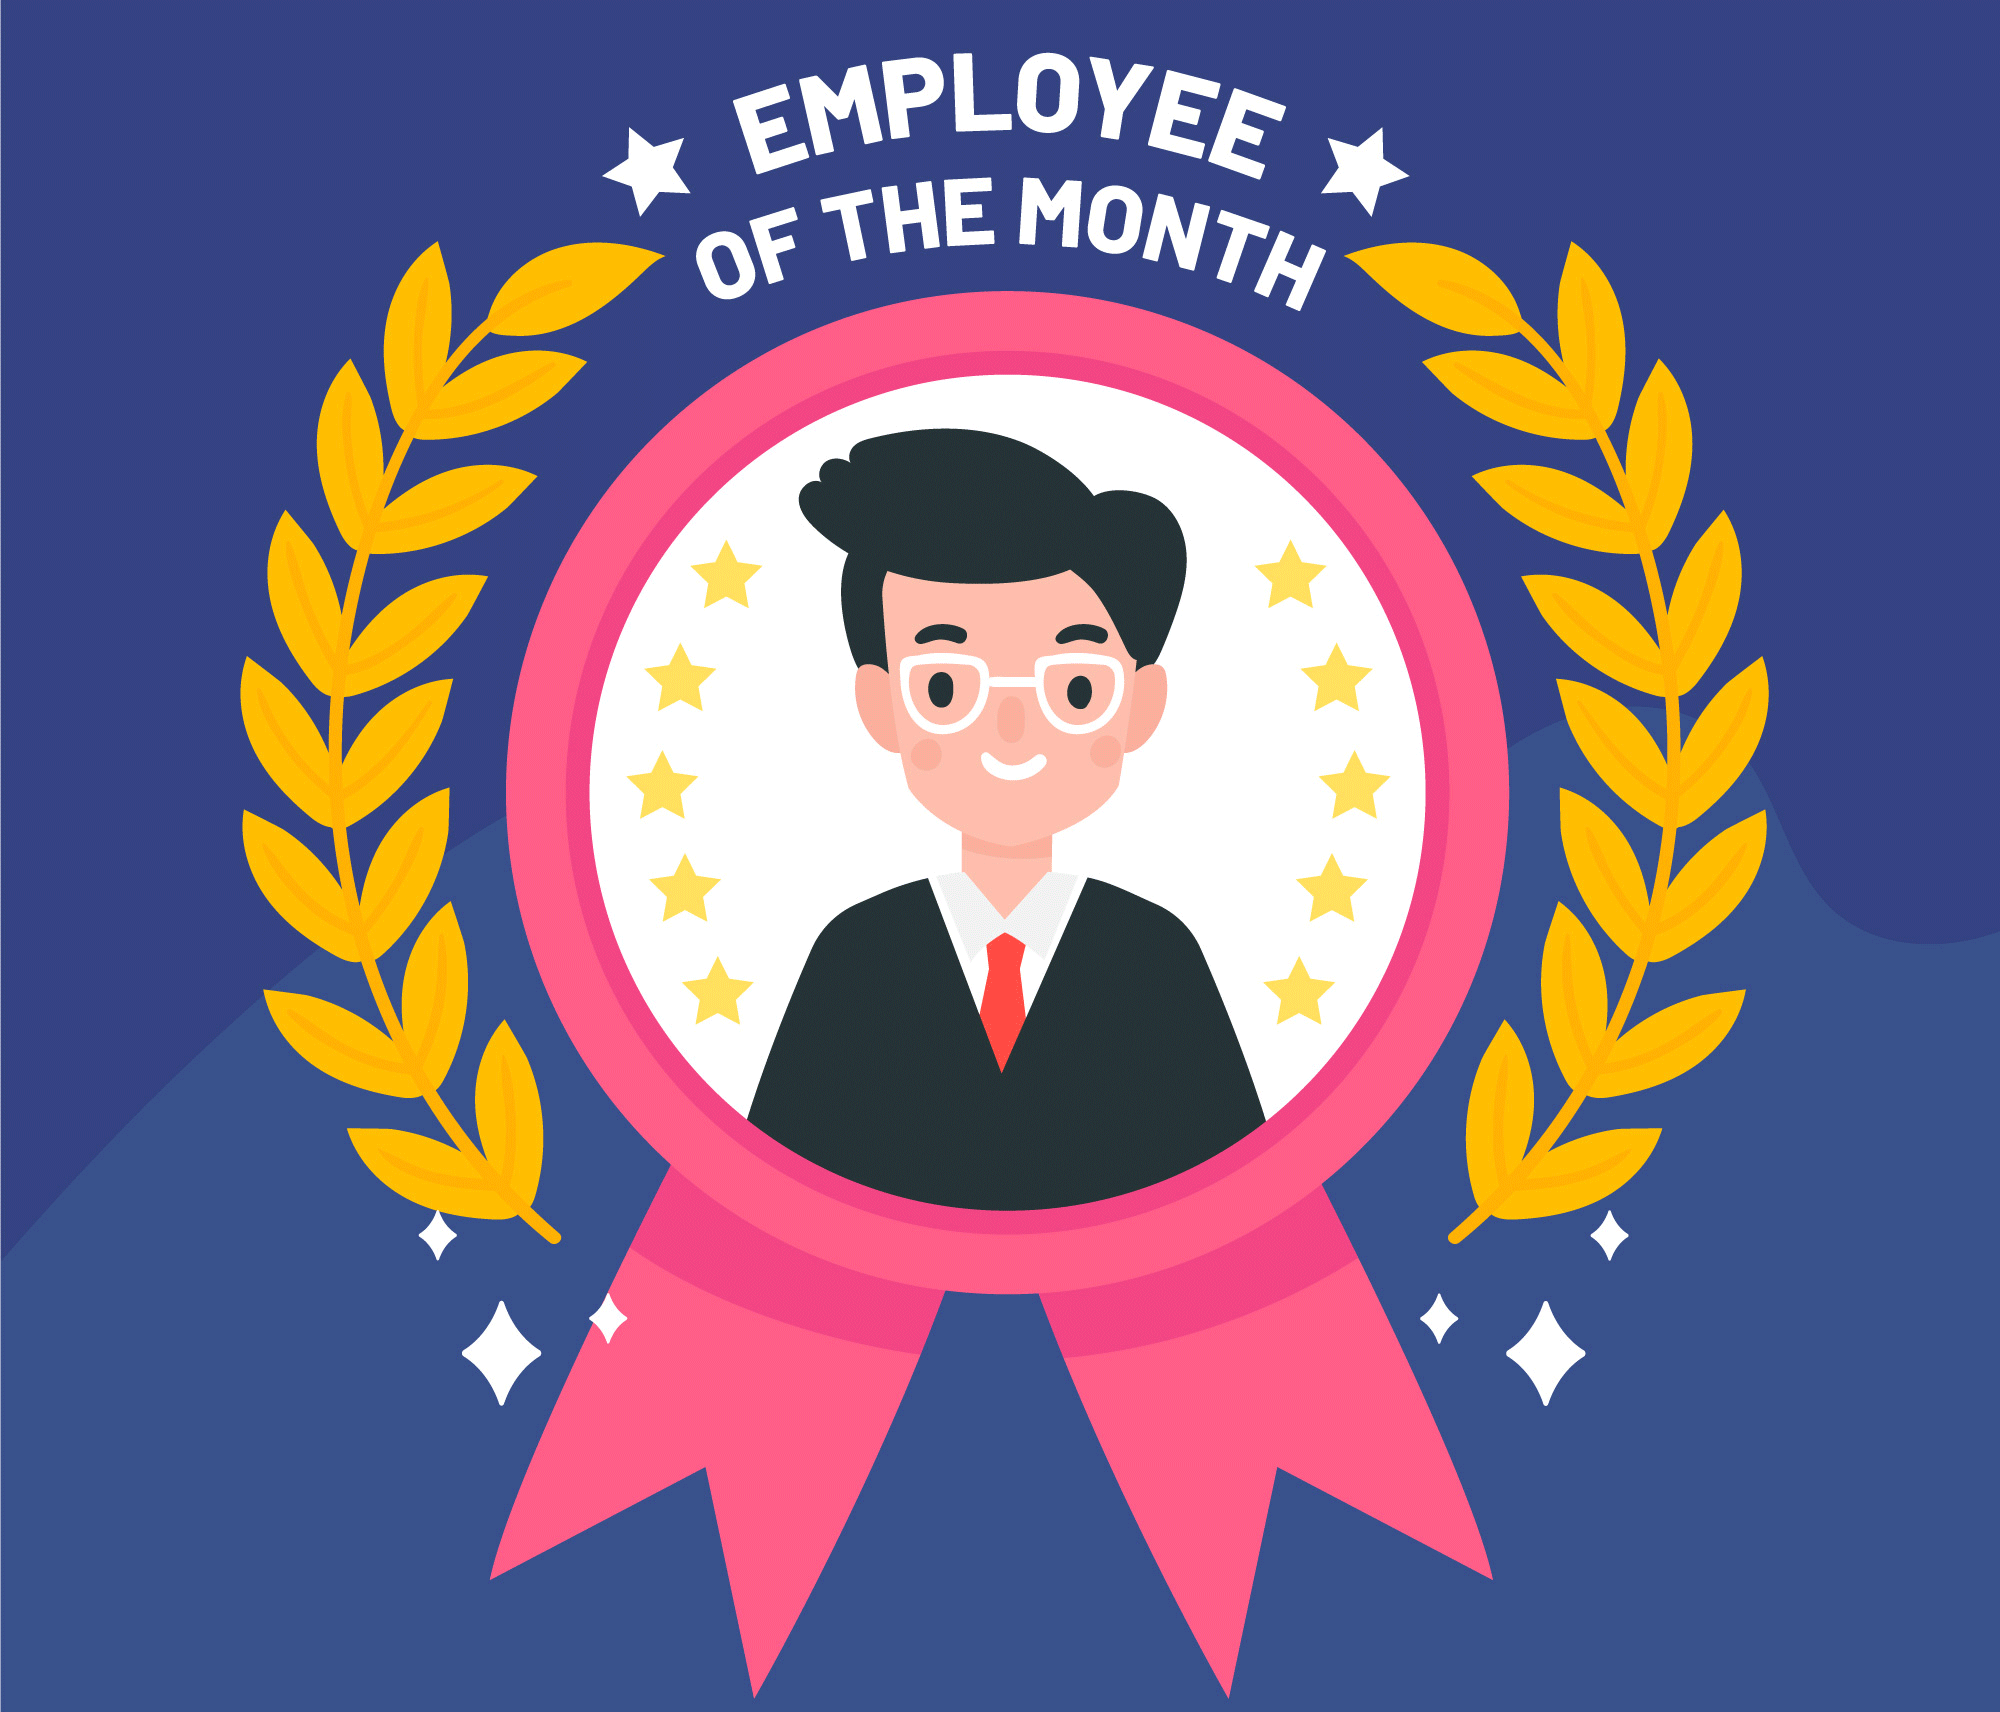 Employee of the Month - Ron Leonard!